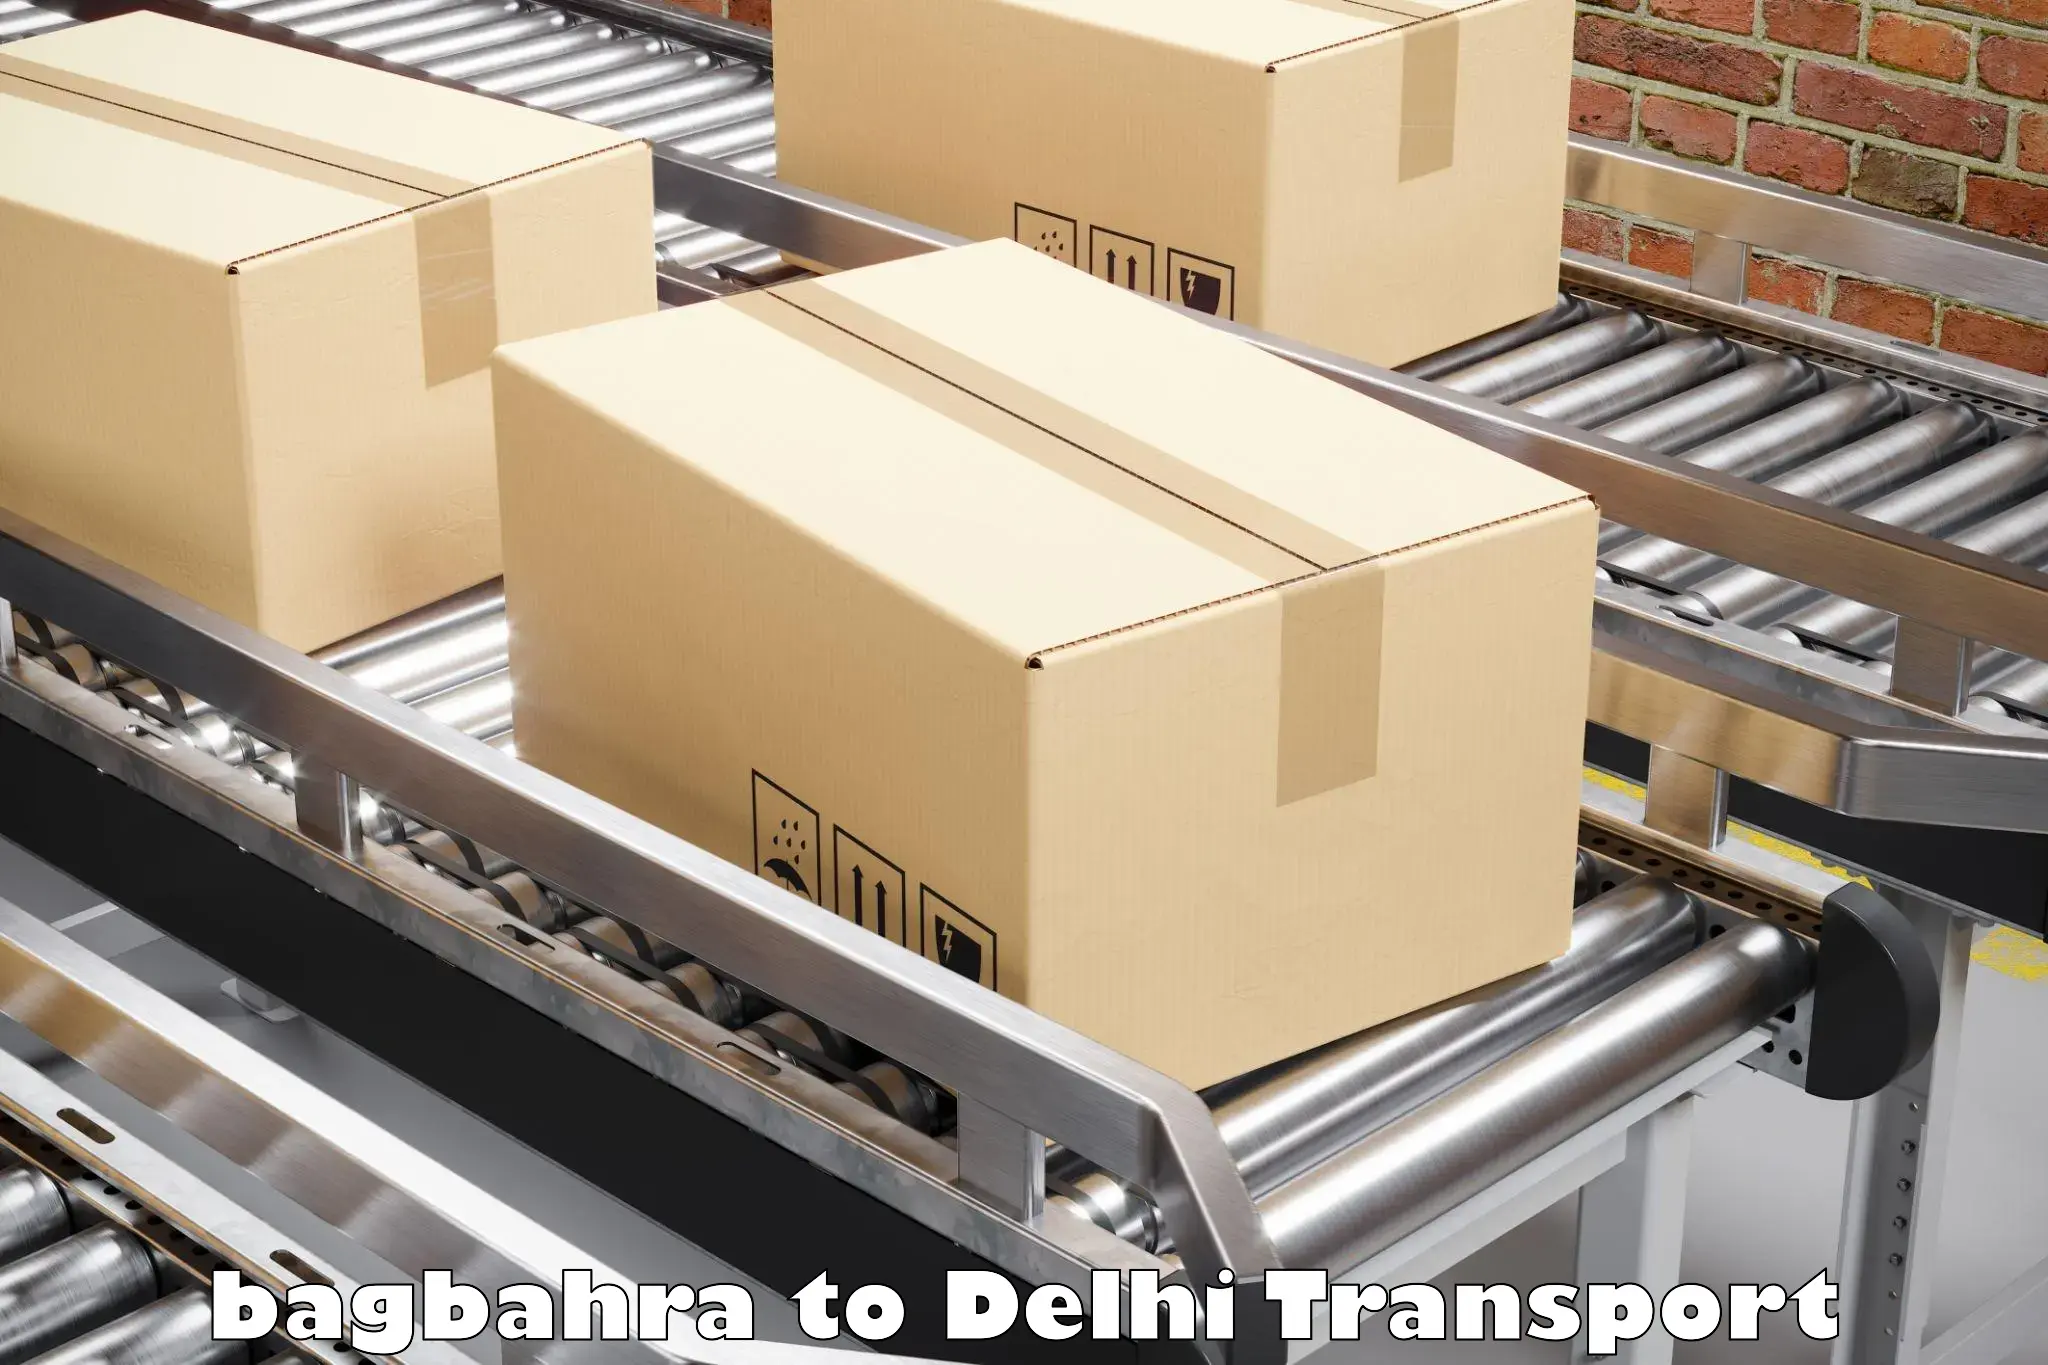 Vehicle transport services bagbahra to IIT Delhi